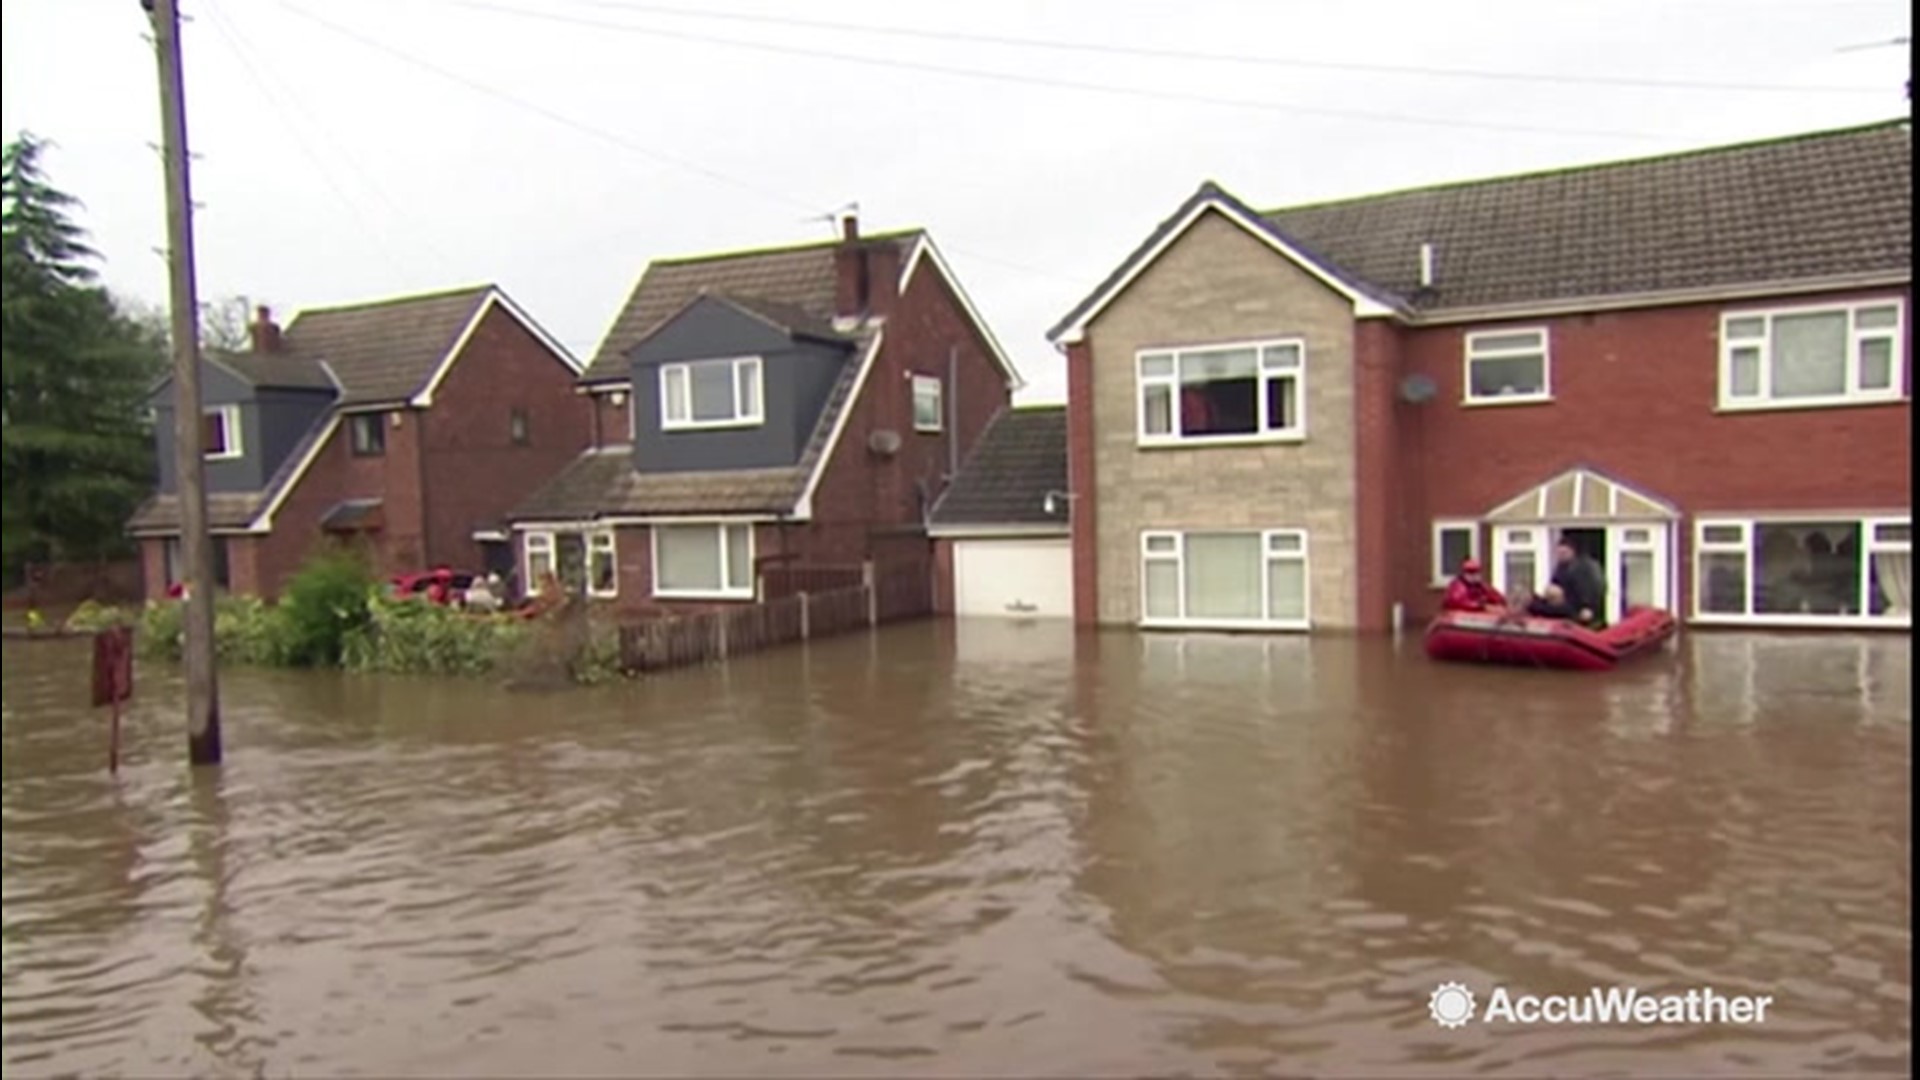 The village of Fishlake, England, suffered tremendously when floodwater filled the streets and seeped into homes on Nov. 9.